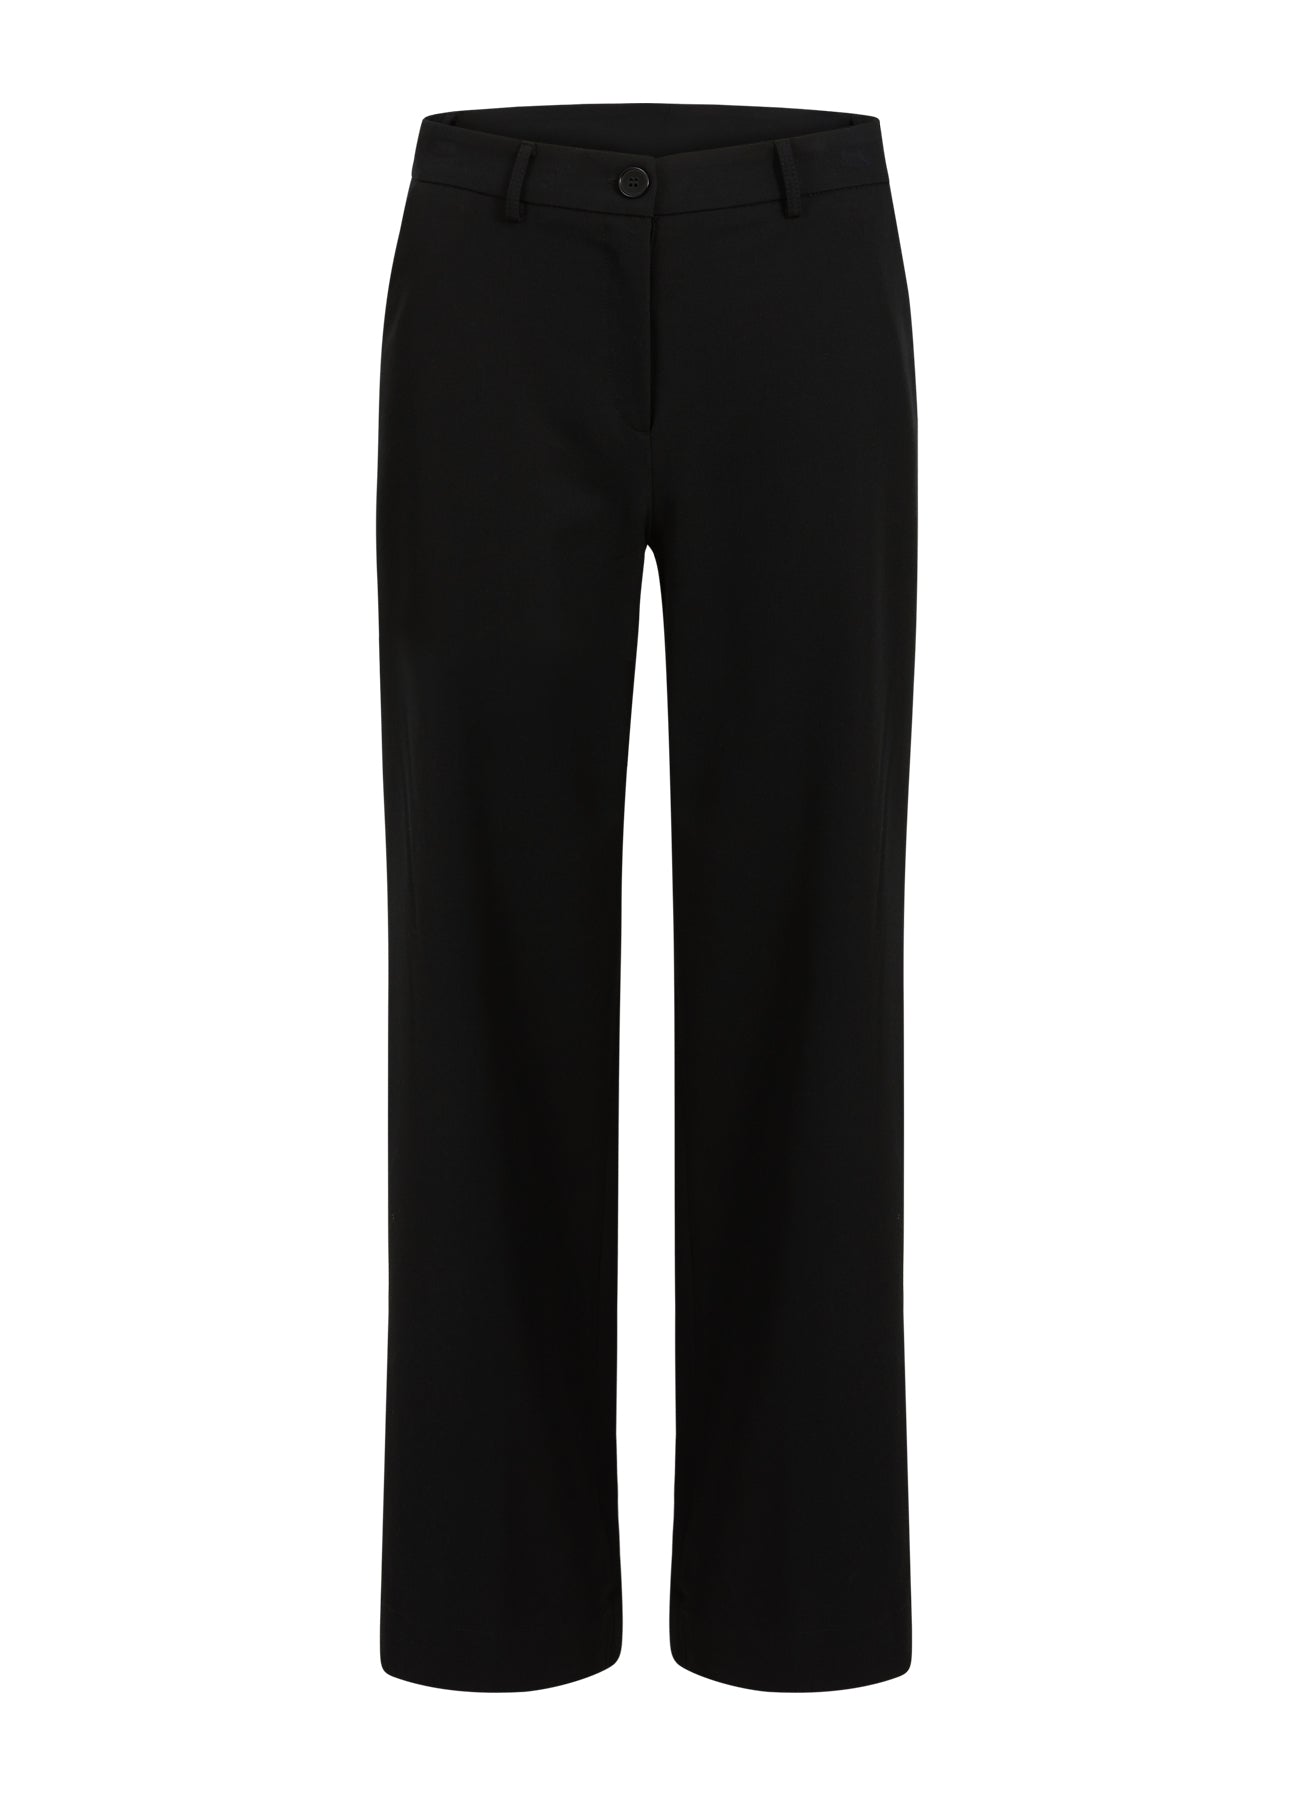 Coster Copenhagen | Style the perfect outfit with our newest pants ...